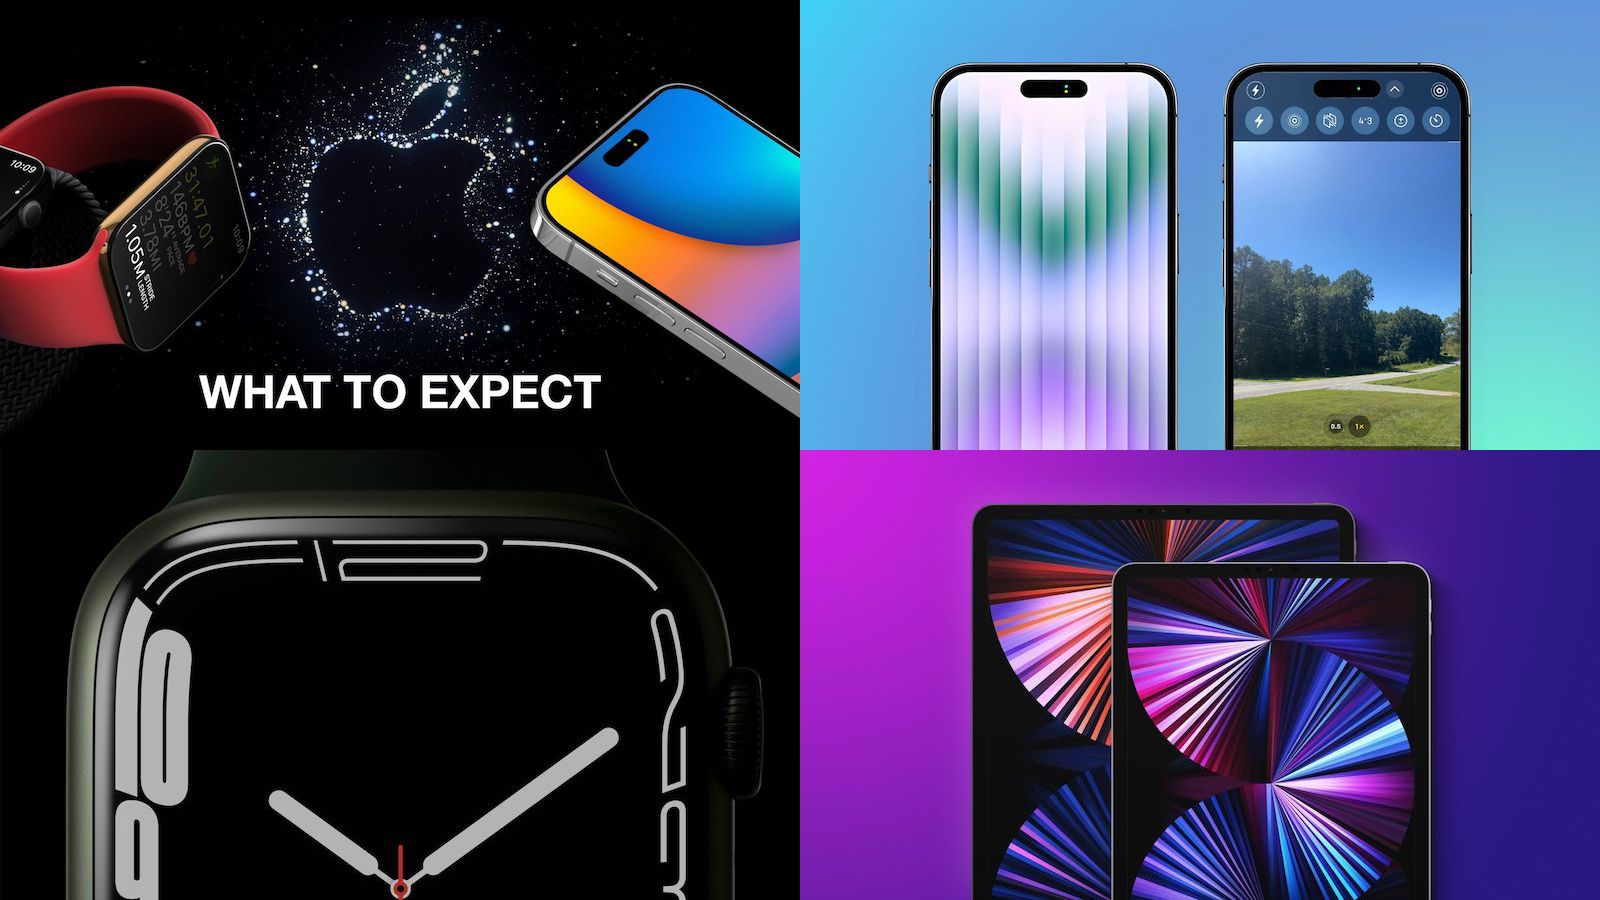 Top Stories: ‘Far Out’ Apple Event Preview With iPhone 14 and Apple Watch Pro Rumors – MacRumors